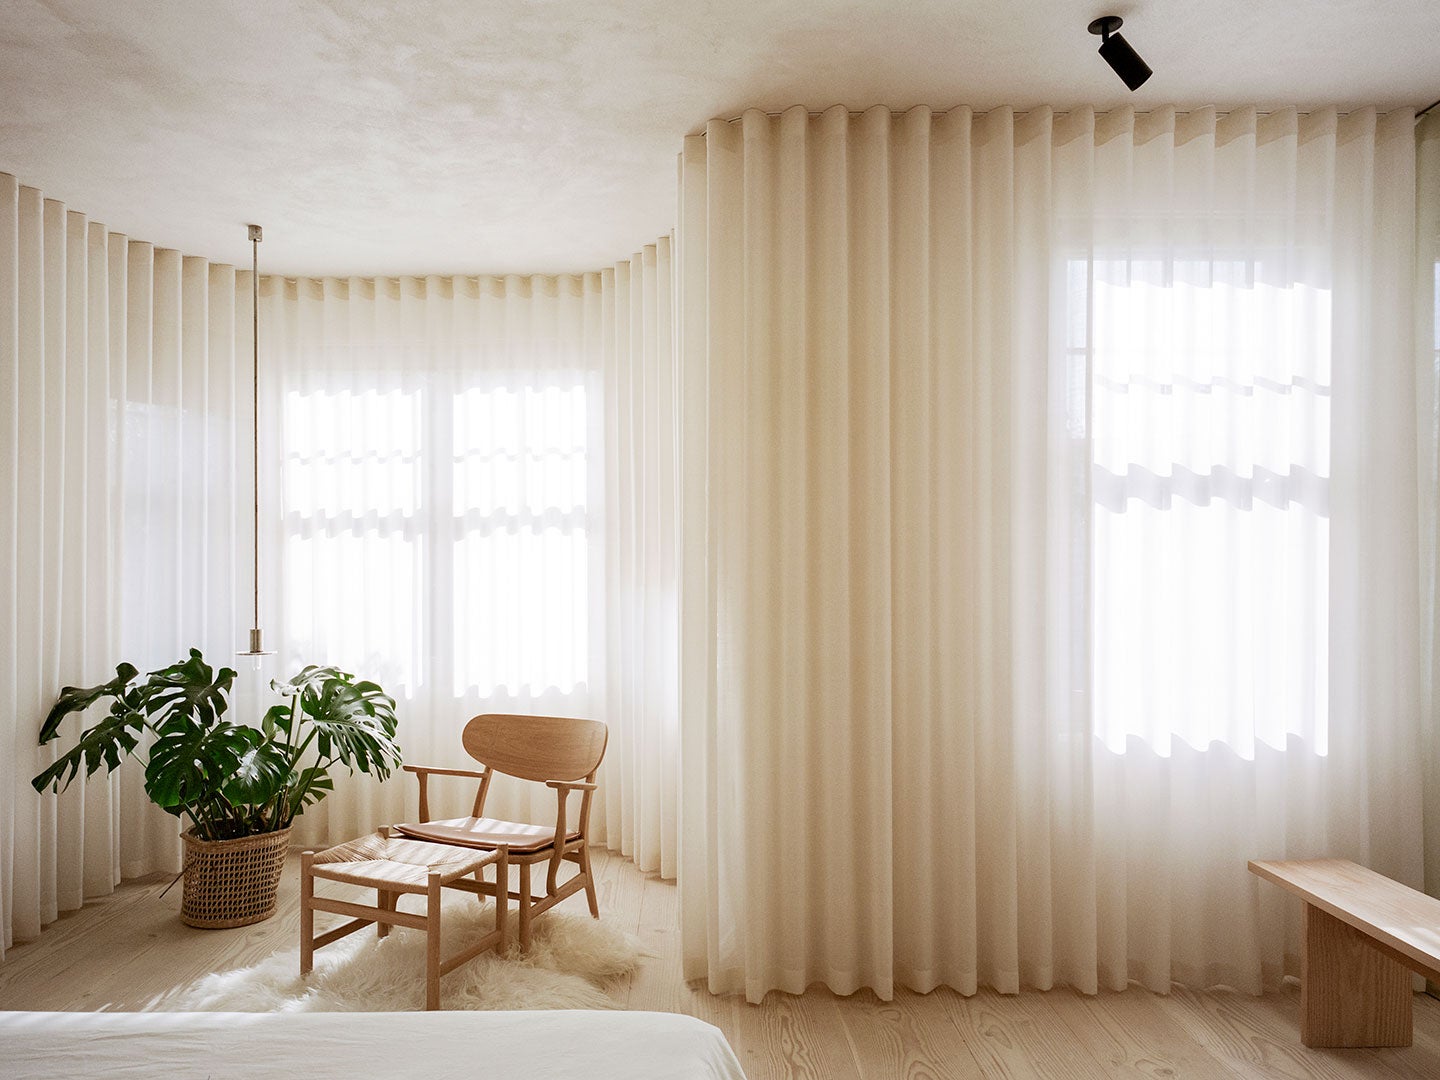 S shaped bedroom curtains